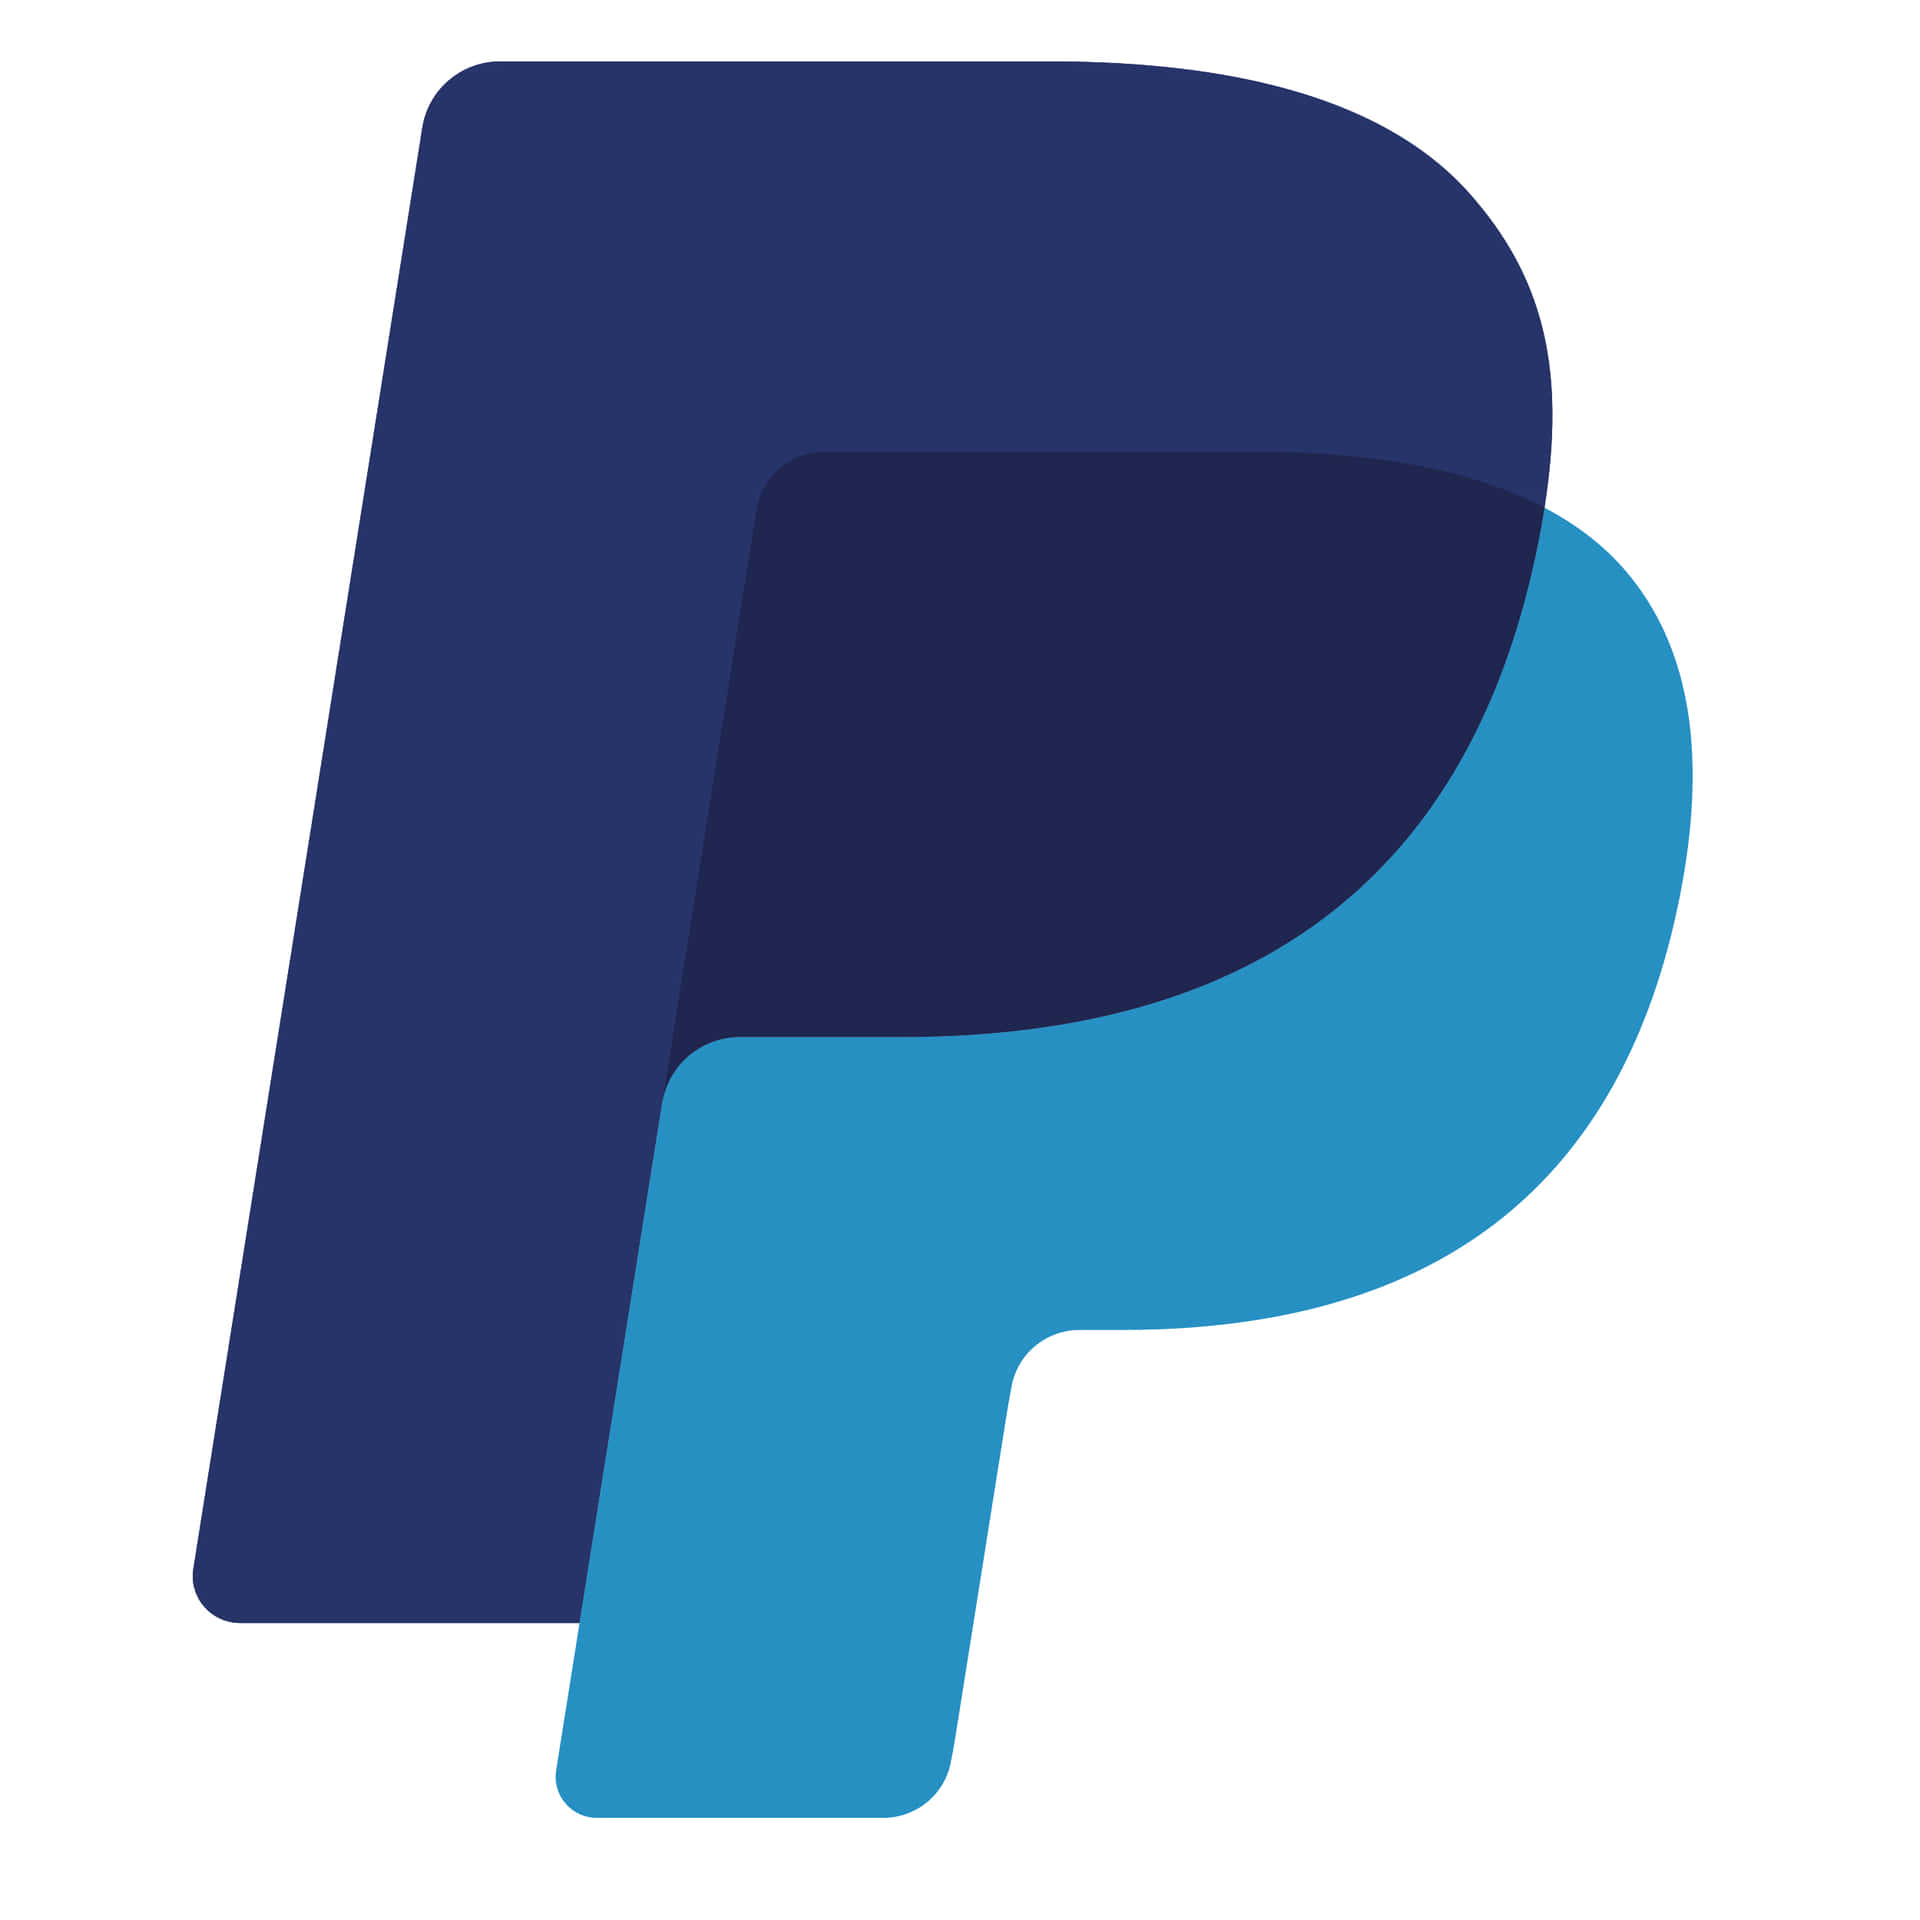 Experience fast, secure payments with PayPal